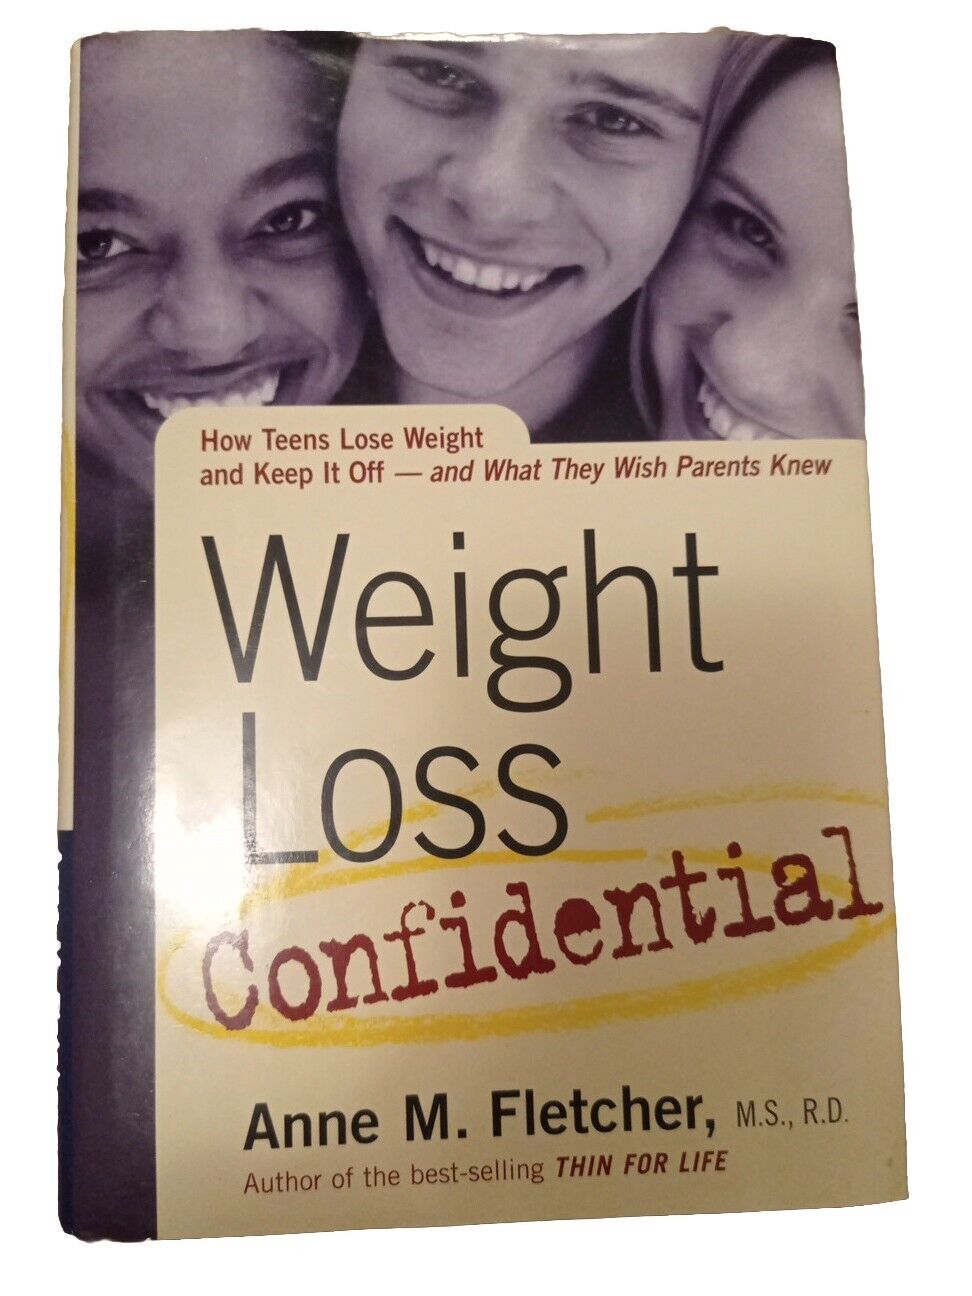 Weight Loss Confidential  - Anne M. Fletcher - AUTOGRAPHED - FIRST EDITION 